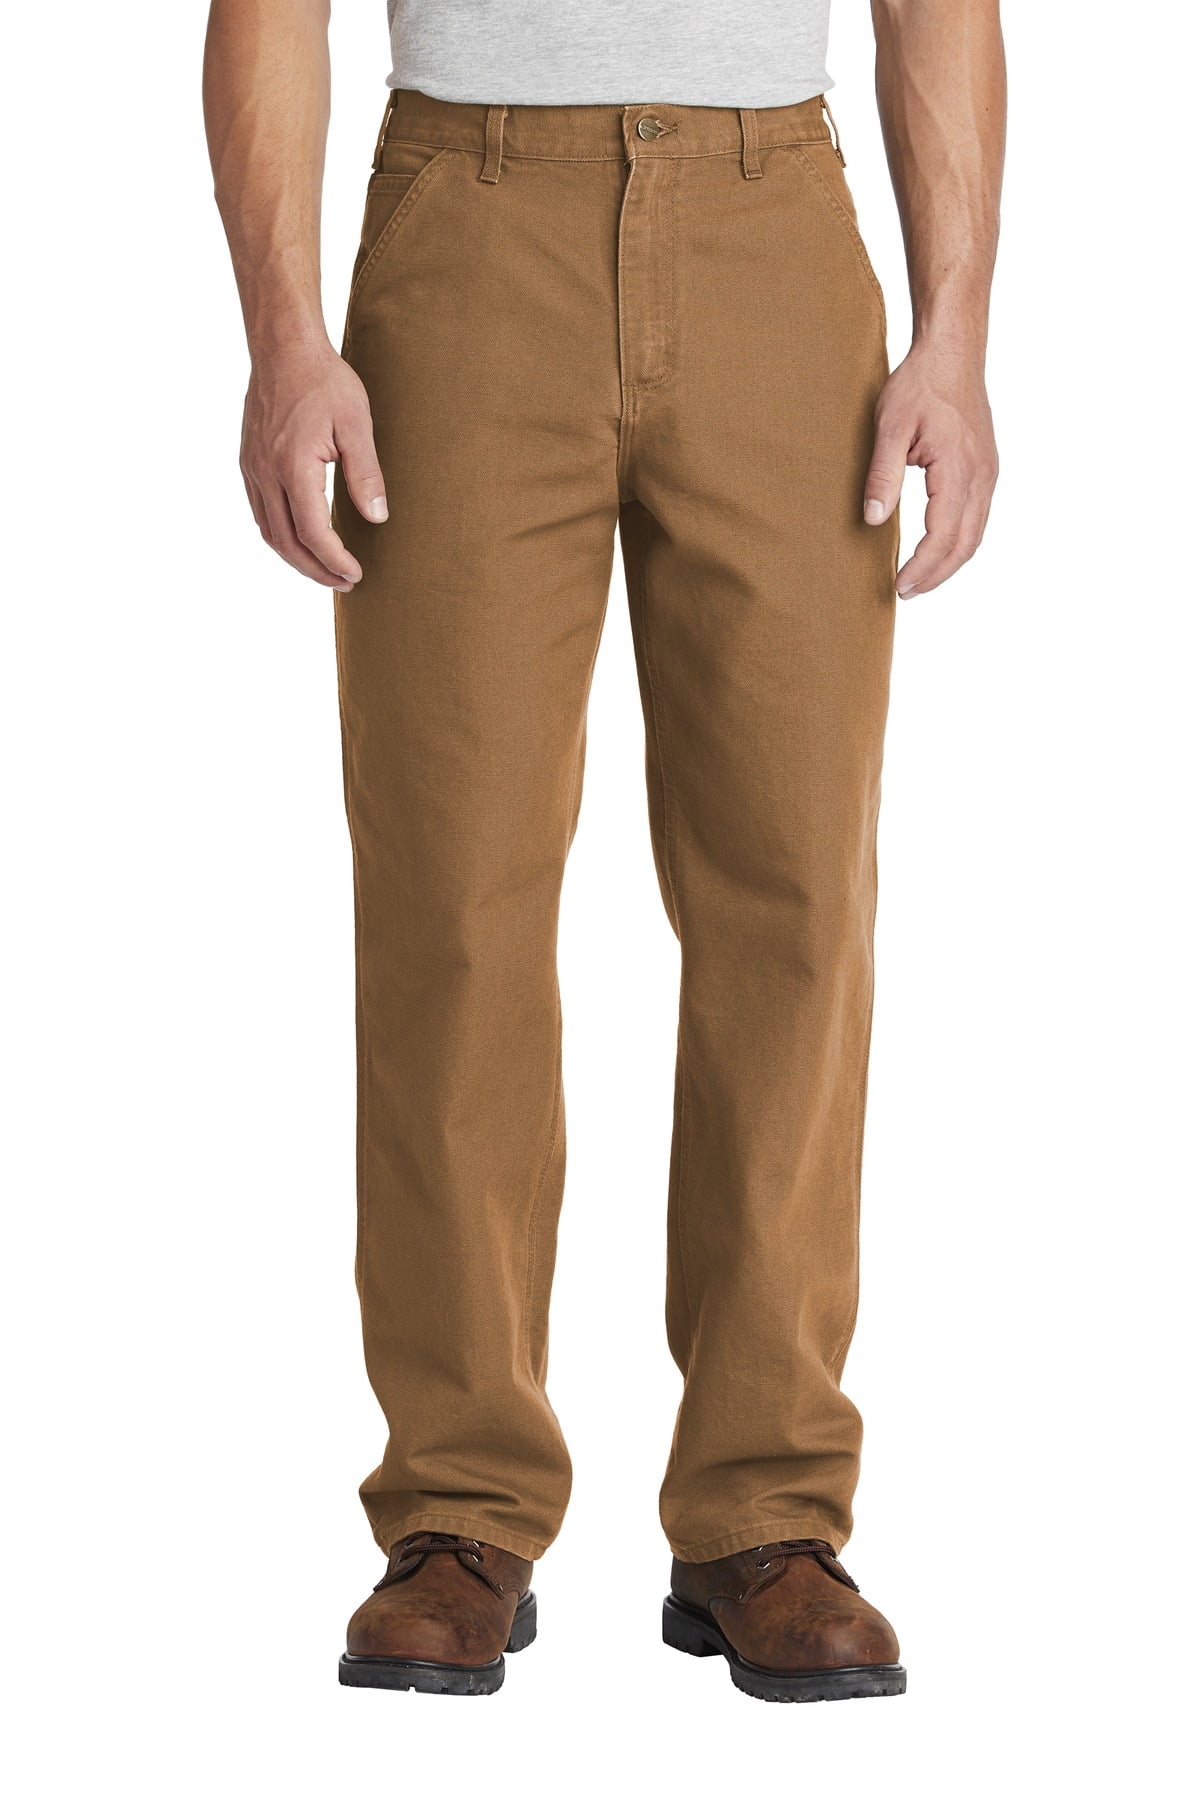 Carhartt Men's Washed-Duck Work Dungaree Pant 